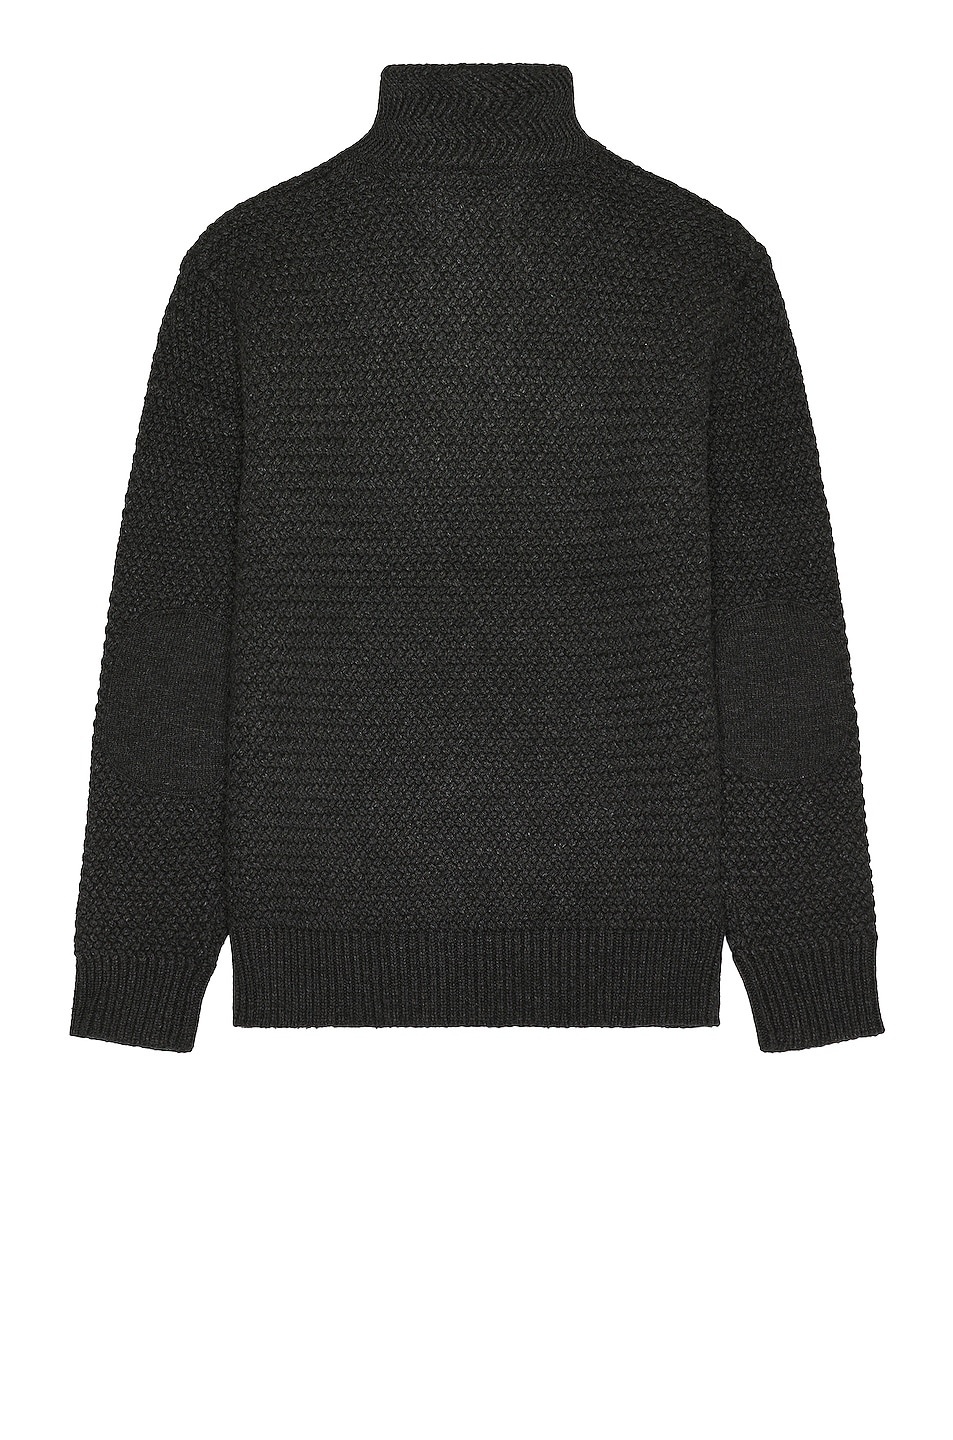 Mens Funnel Neck Military Sweater - 2